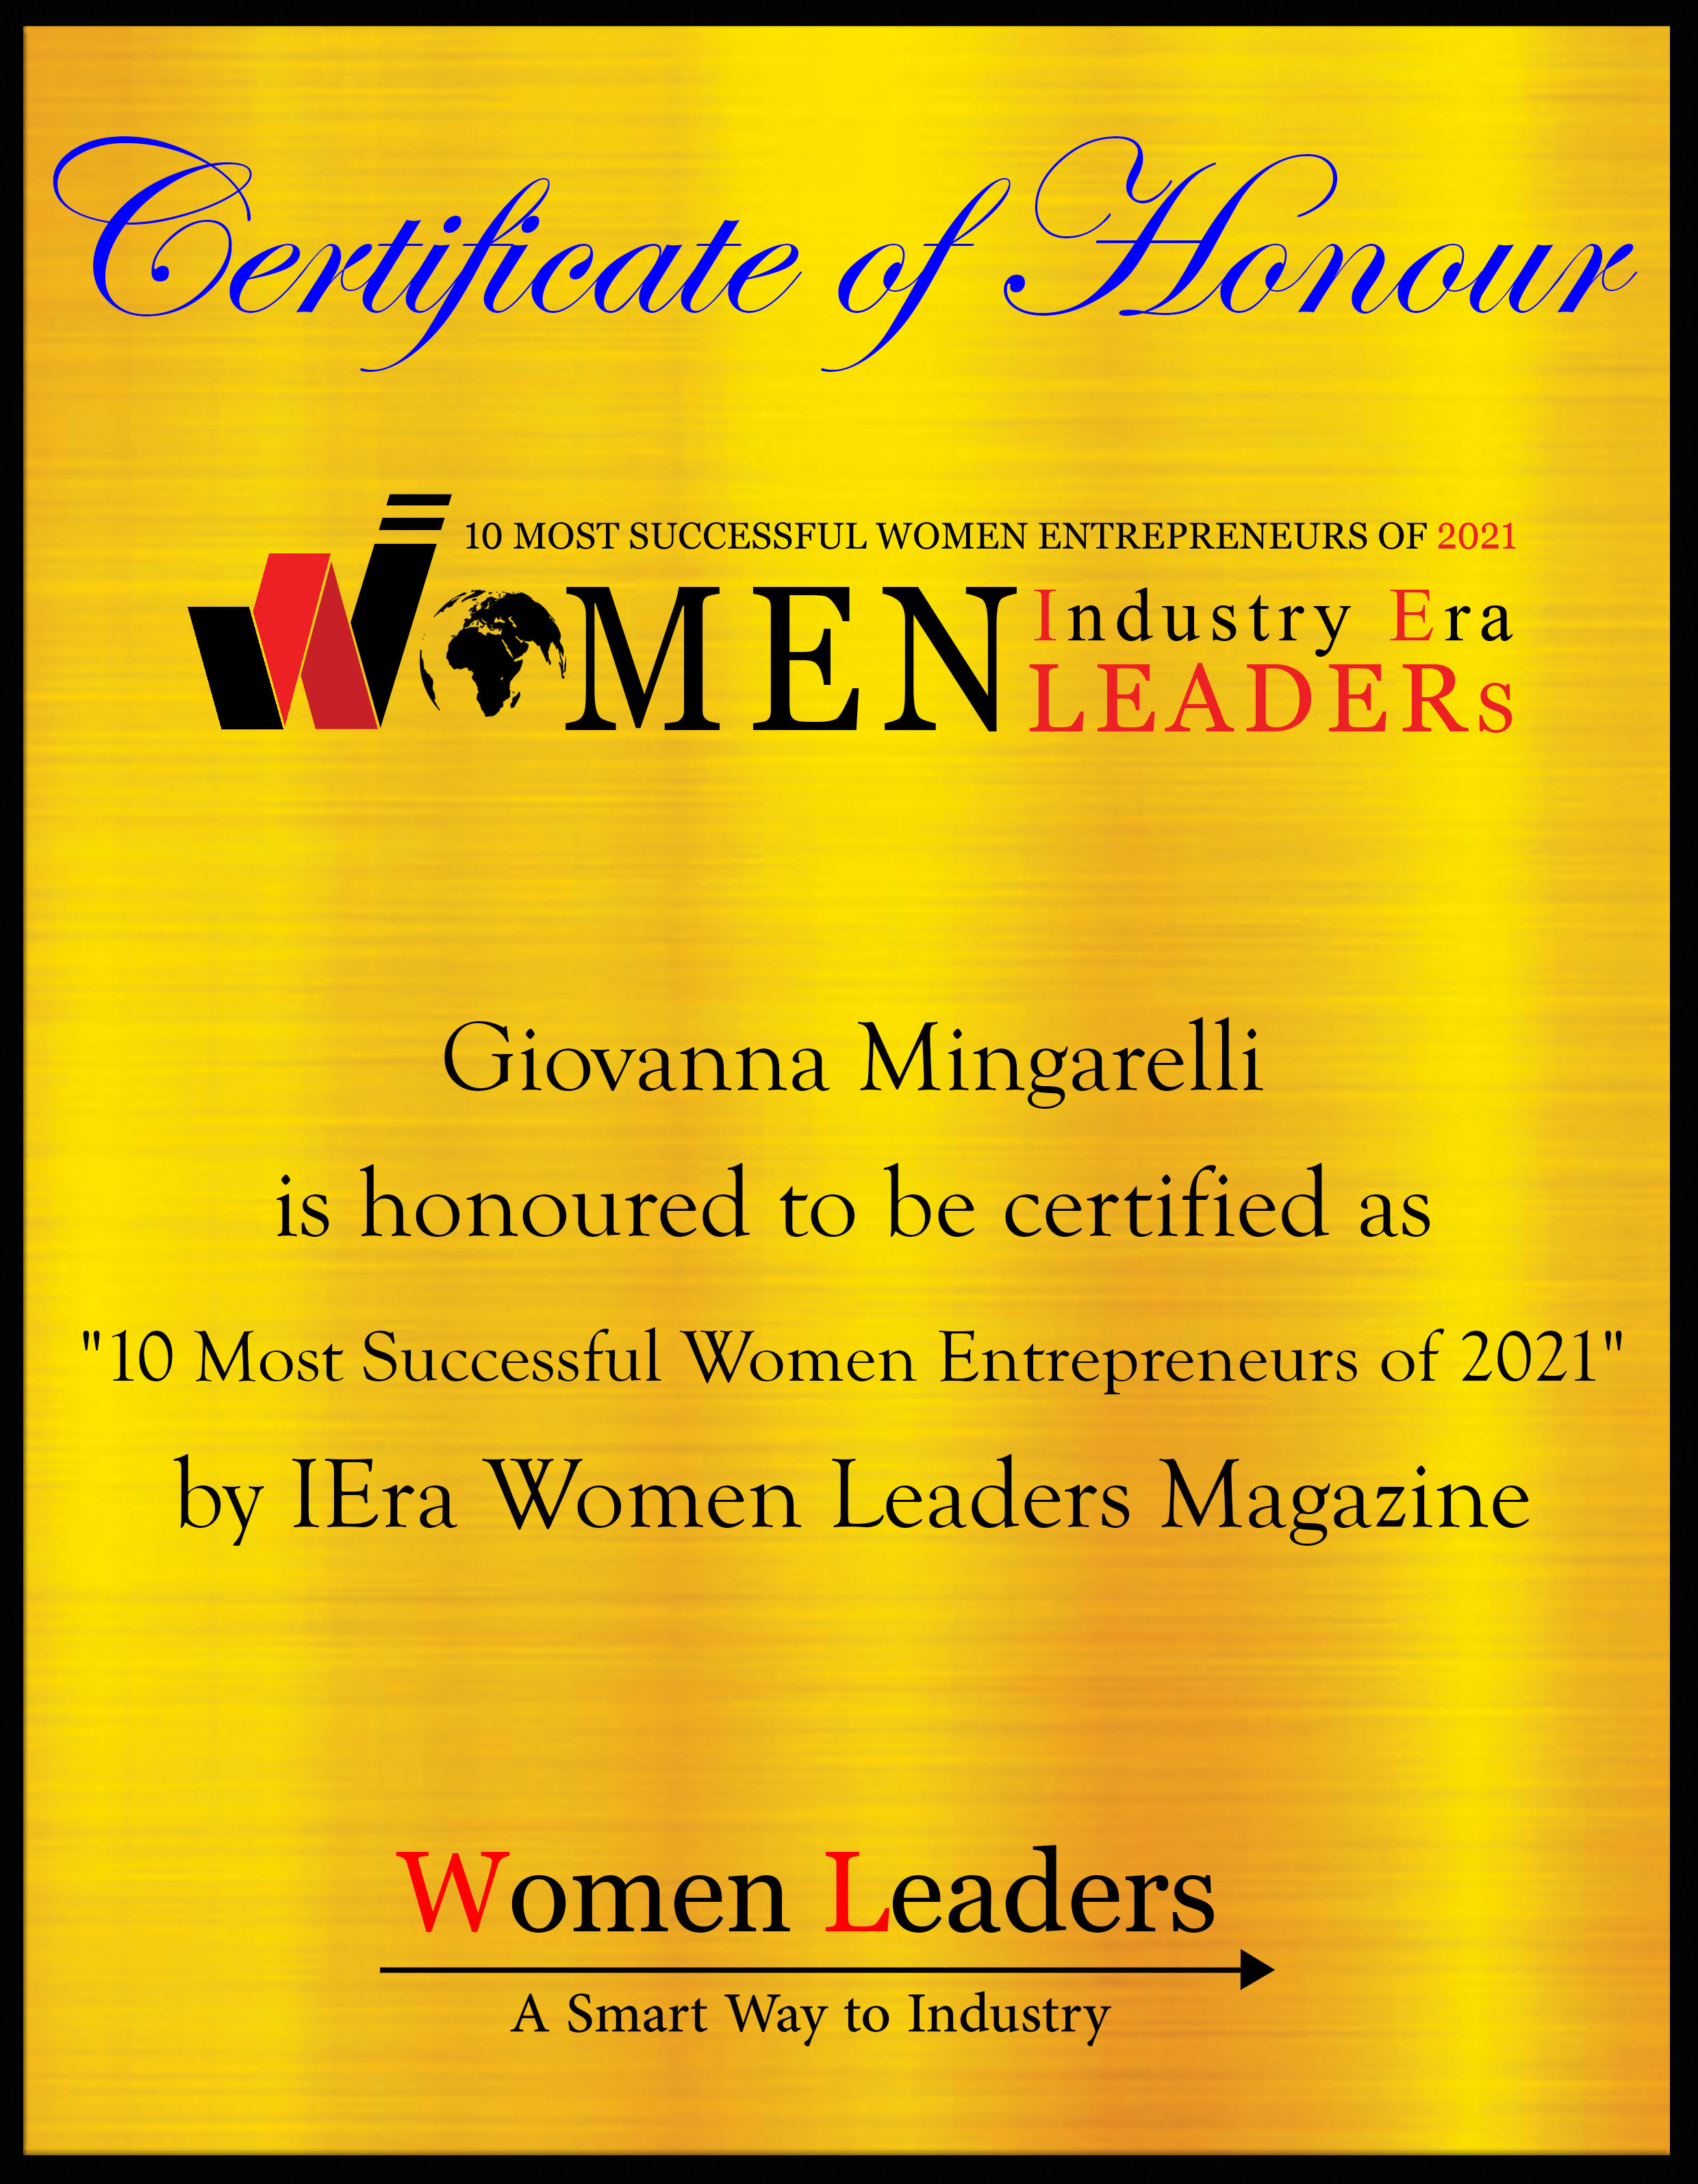 Giovanna Mingarelli CEO and Co-Founder of M&C Consulting, Most Successful Women Entrepreneurs of 2021